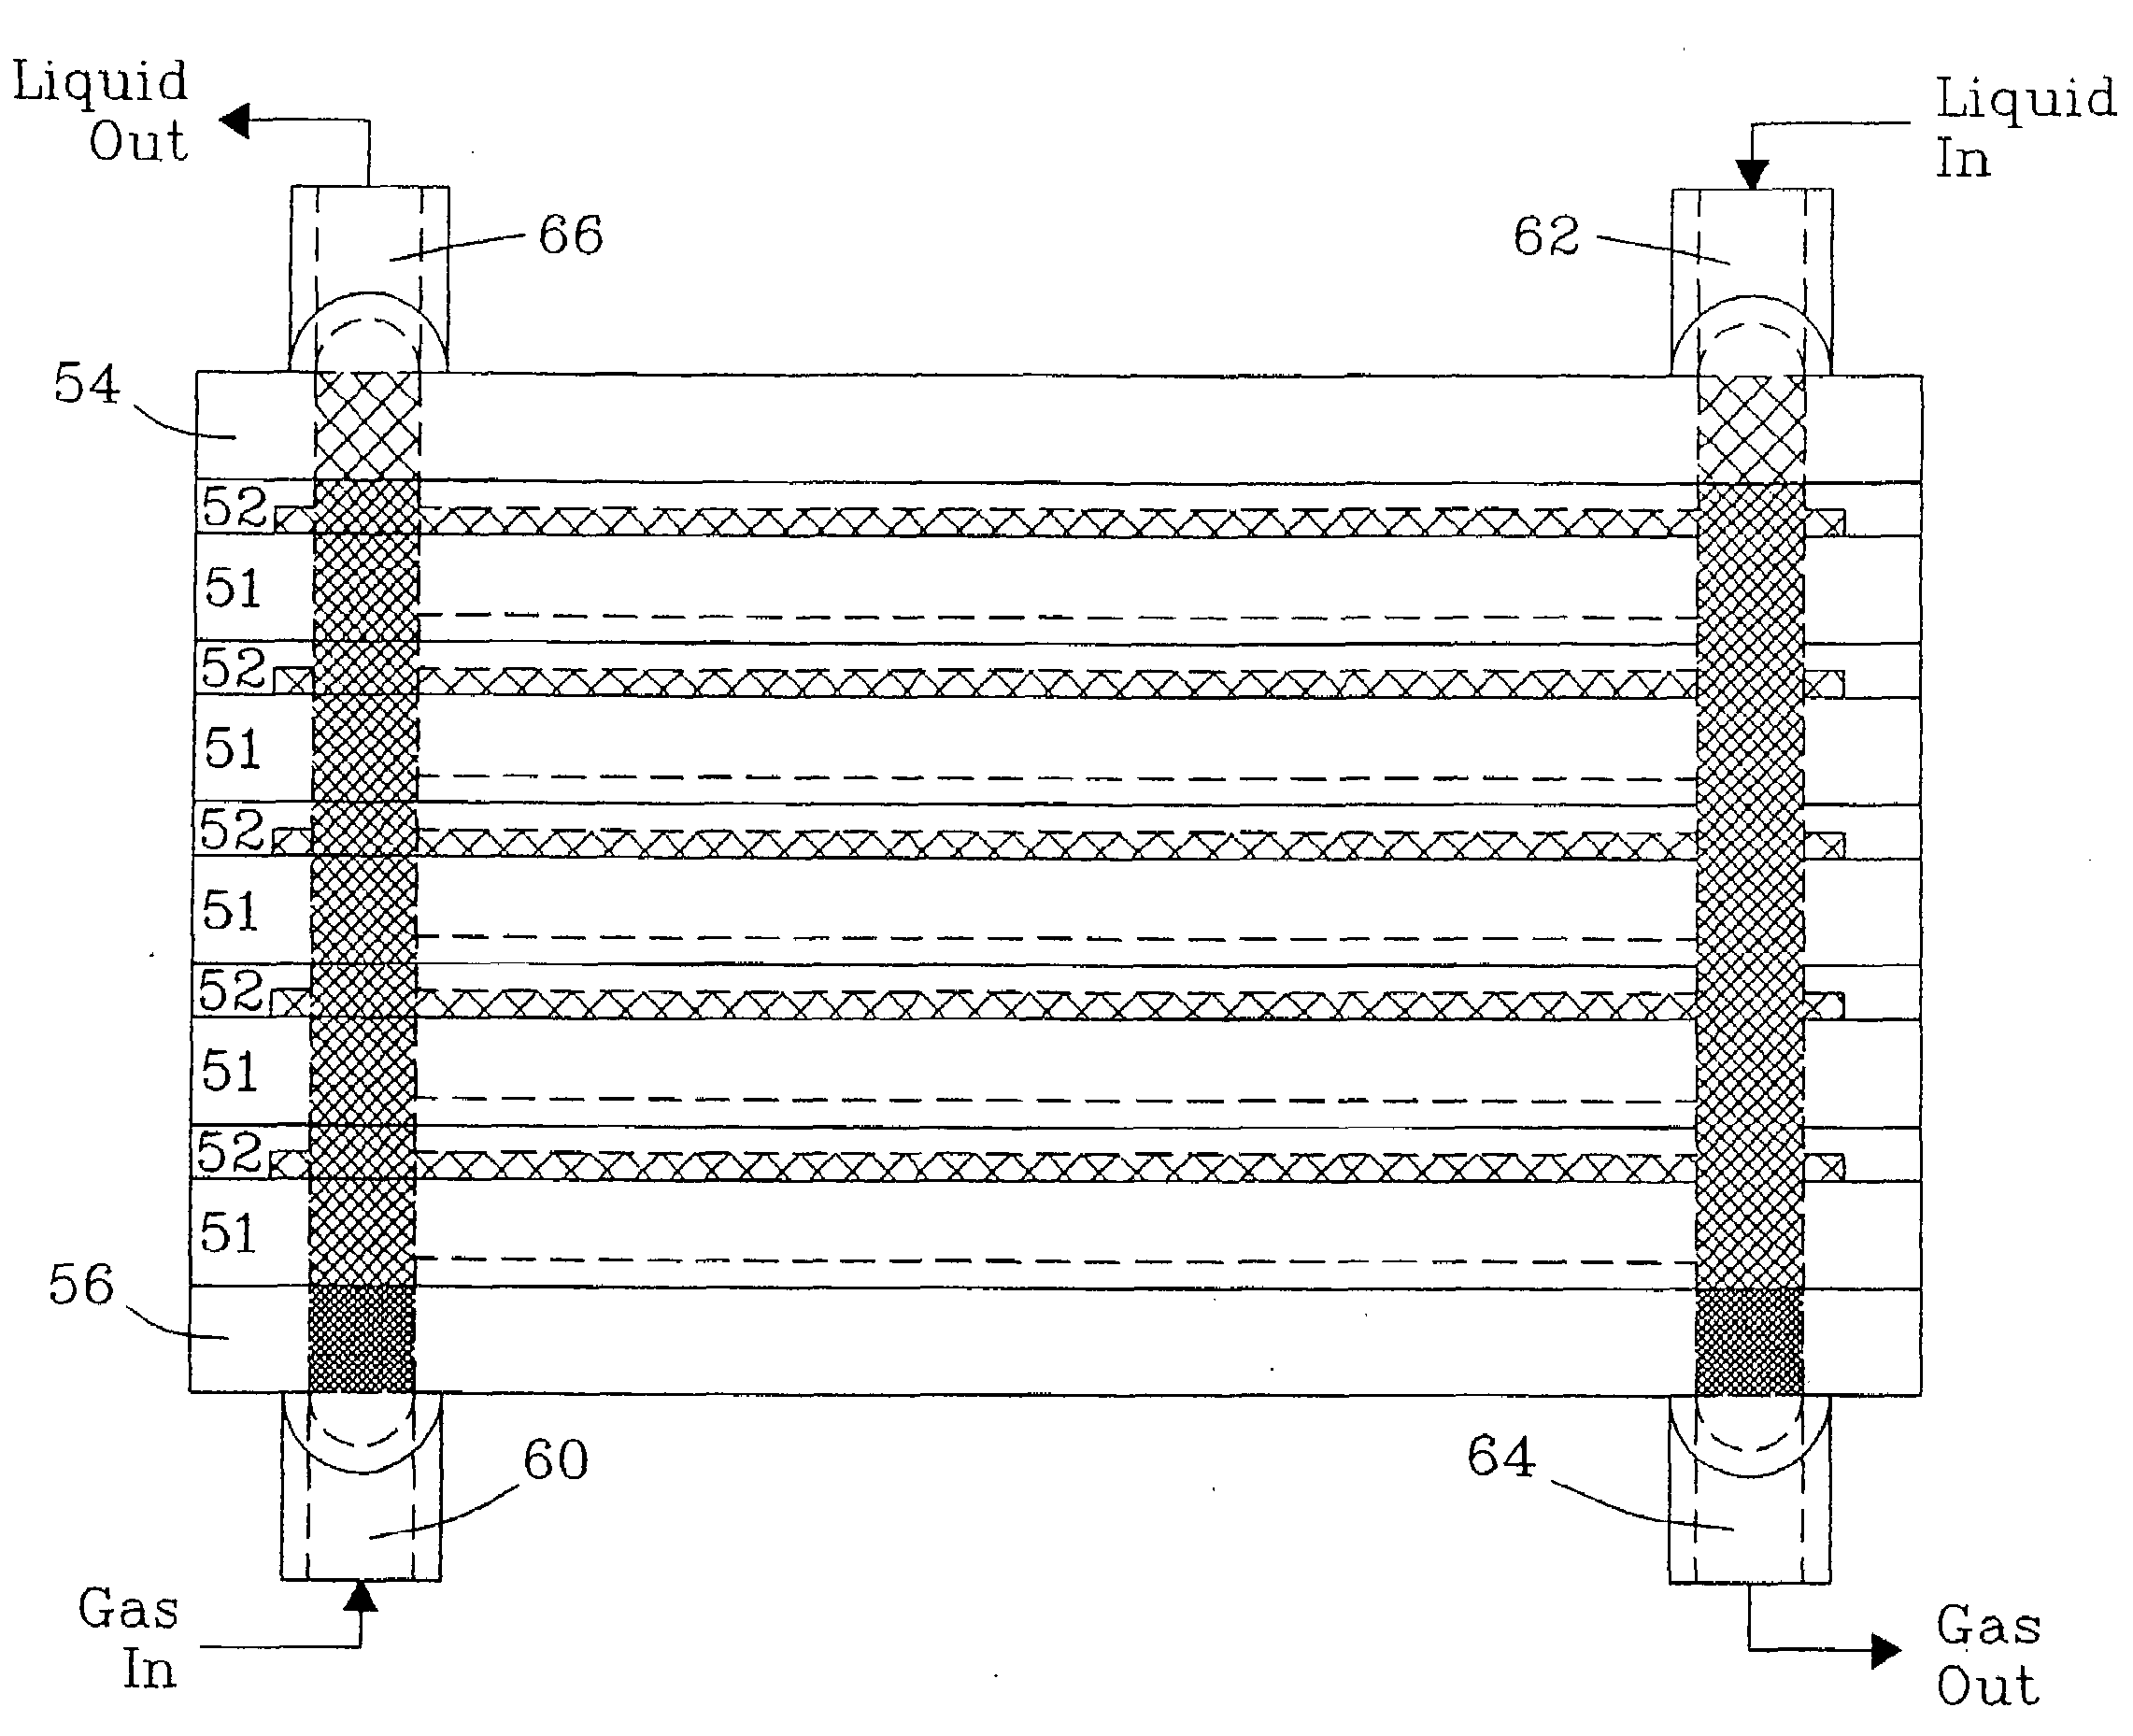 Mixing in Wicking Structures and the Use of Enhanced Mixing Within Wicks in Microchannel Devices